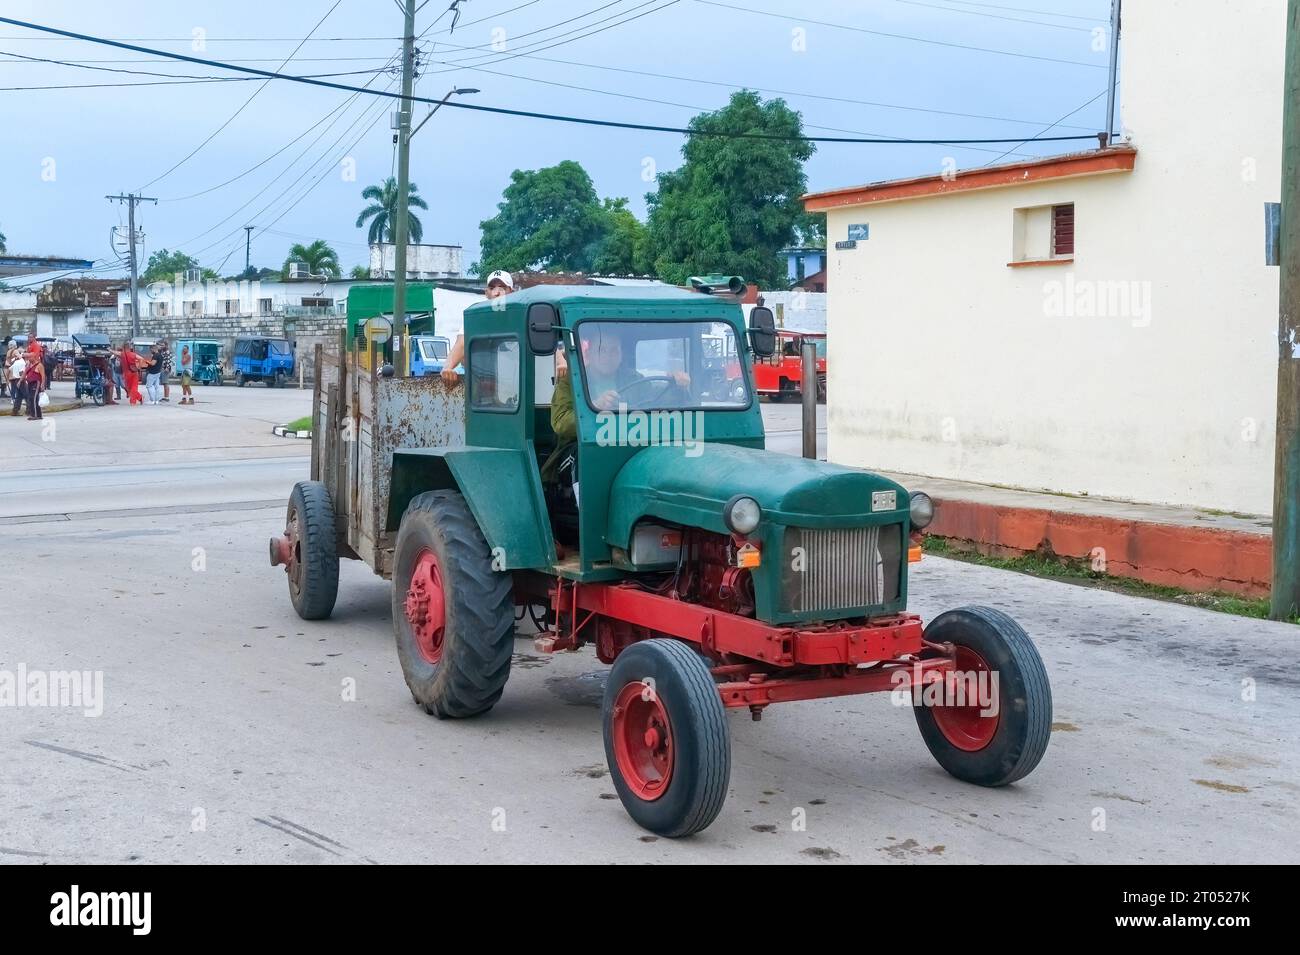 A man with a military shirt drives an old agricultural tractor on a city street.Santa Clara, Cuba, 2023 Stock Photo